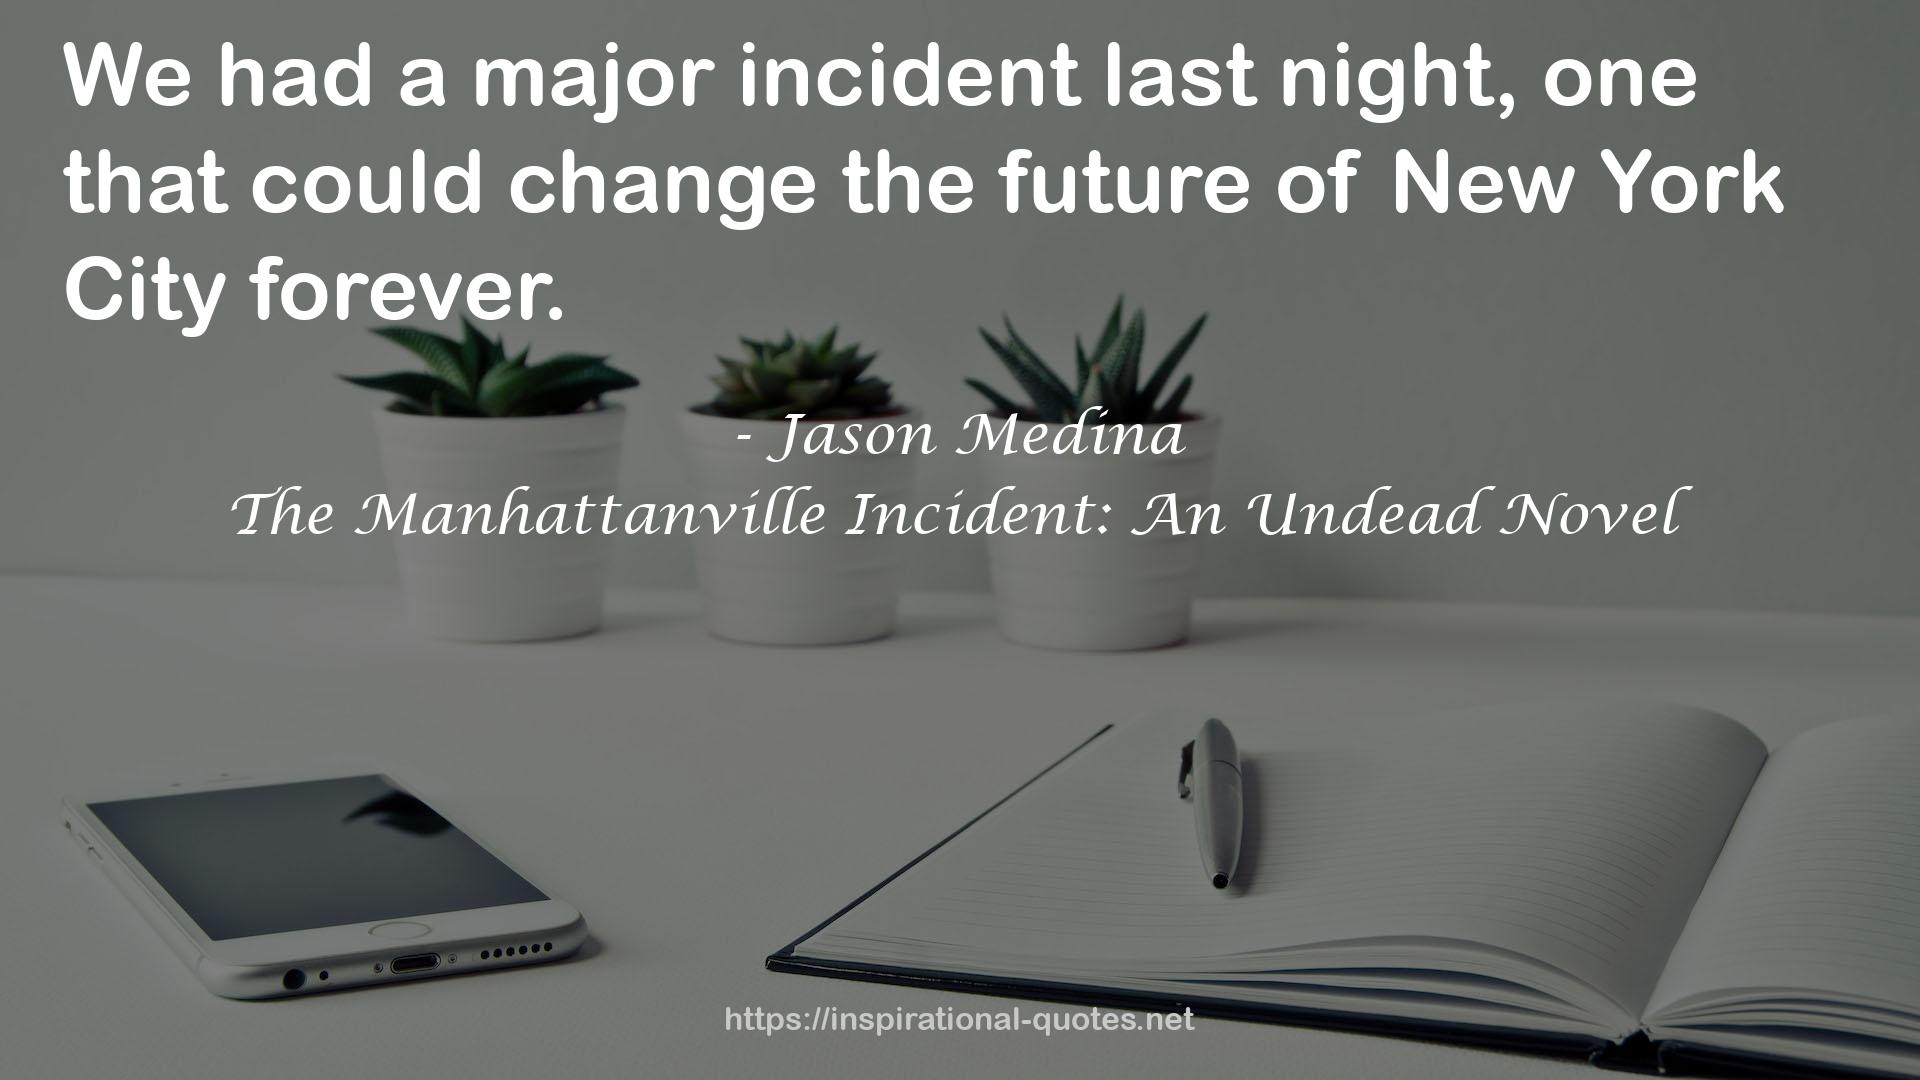 The Manhattanville Incident: An Undead Novel QUOTES